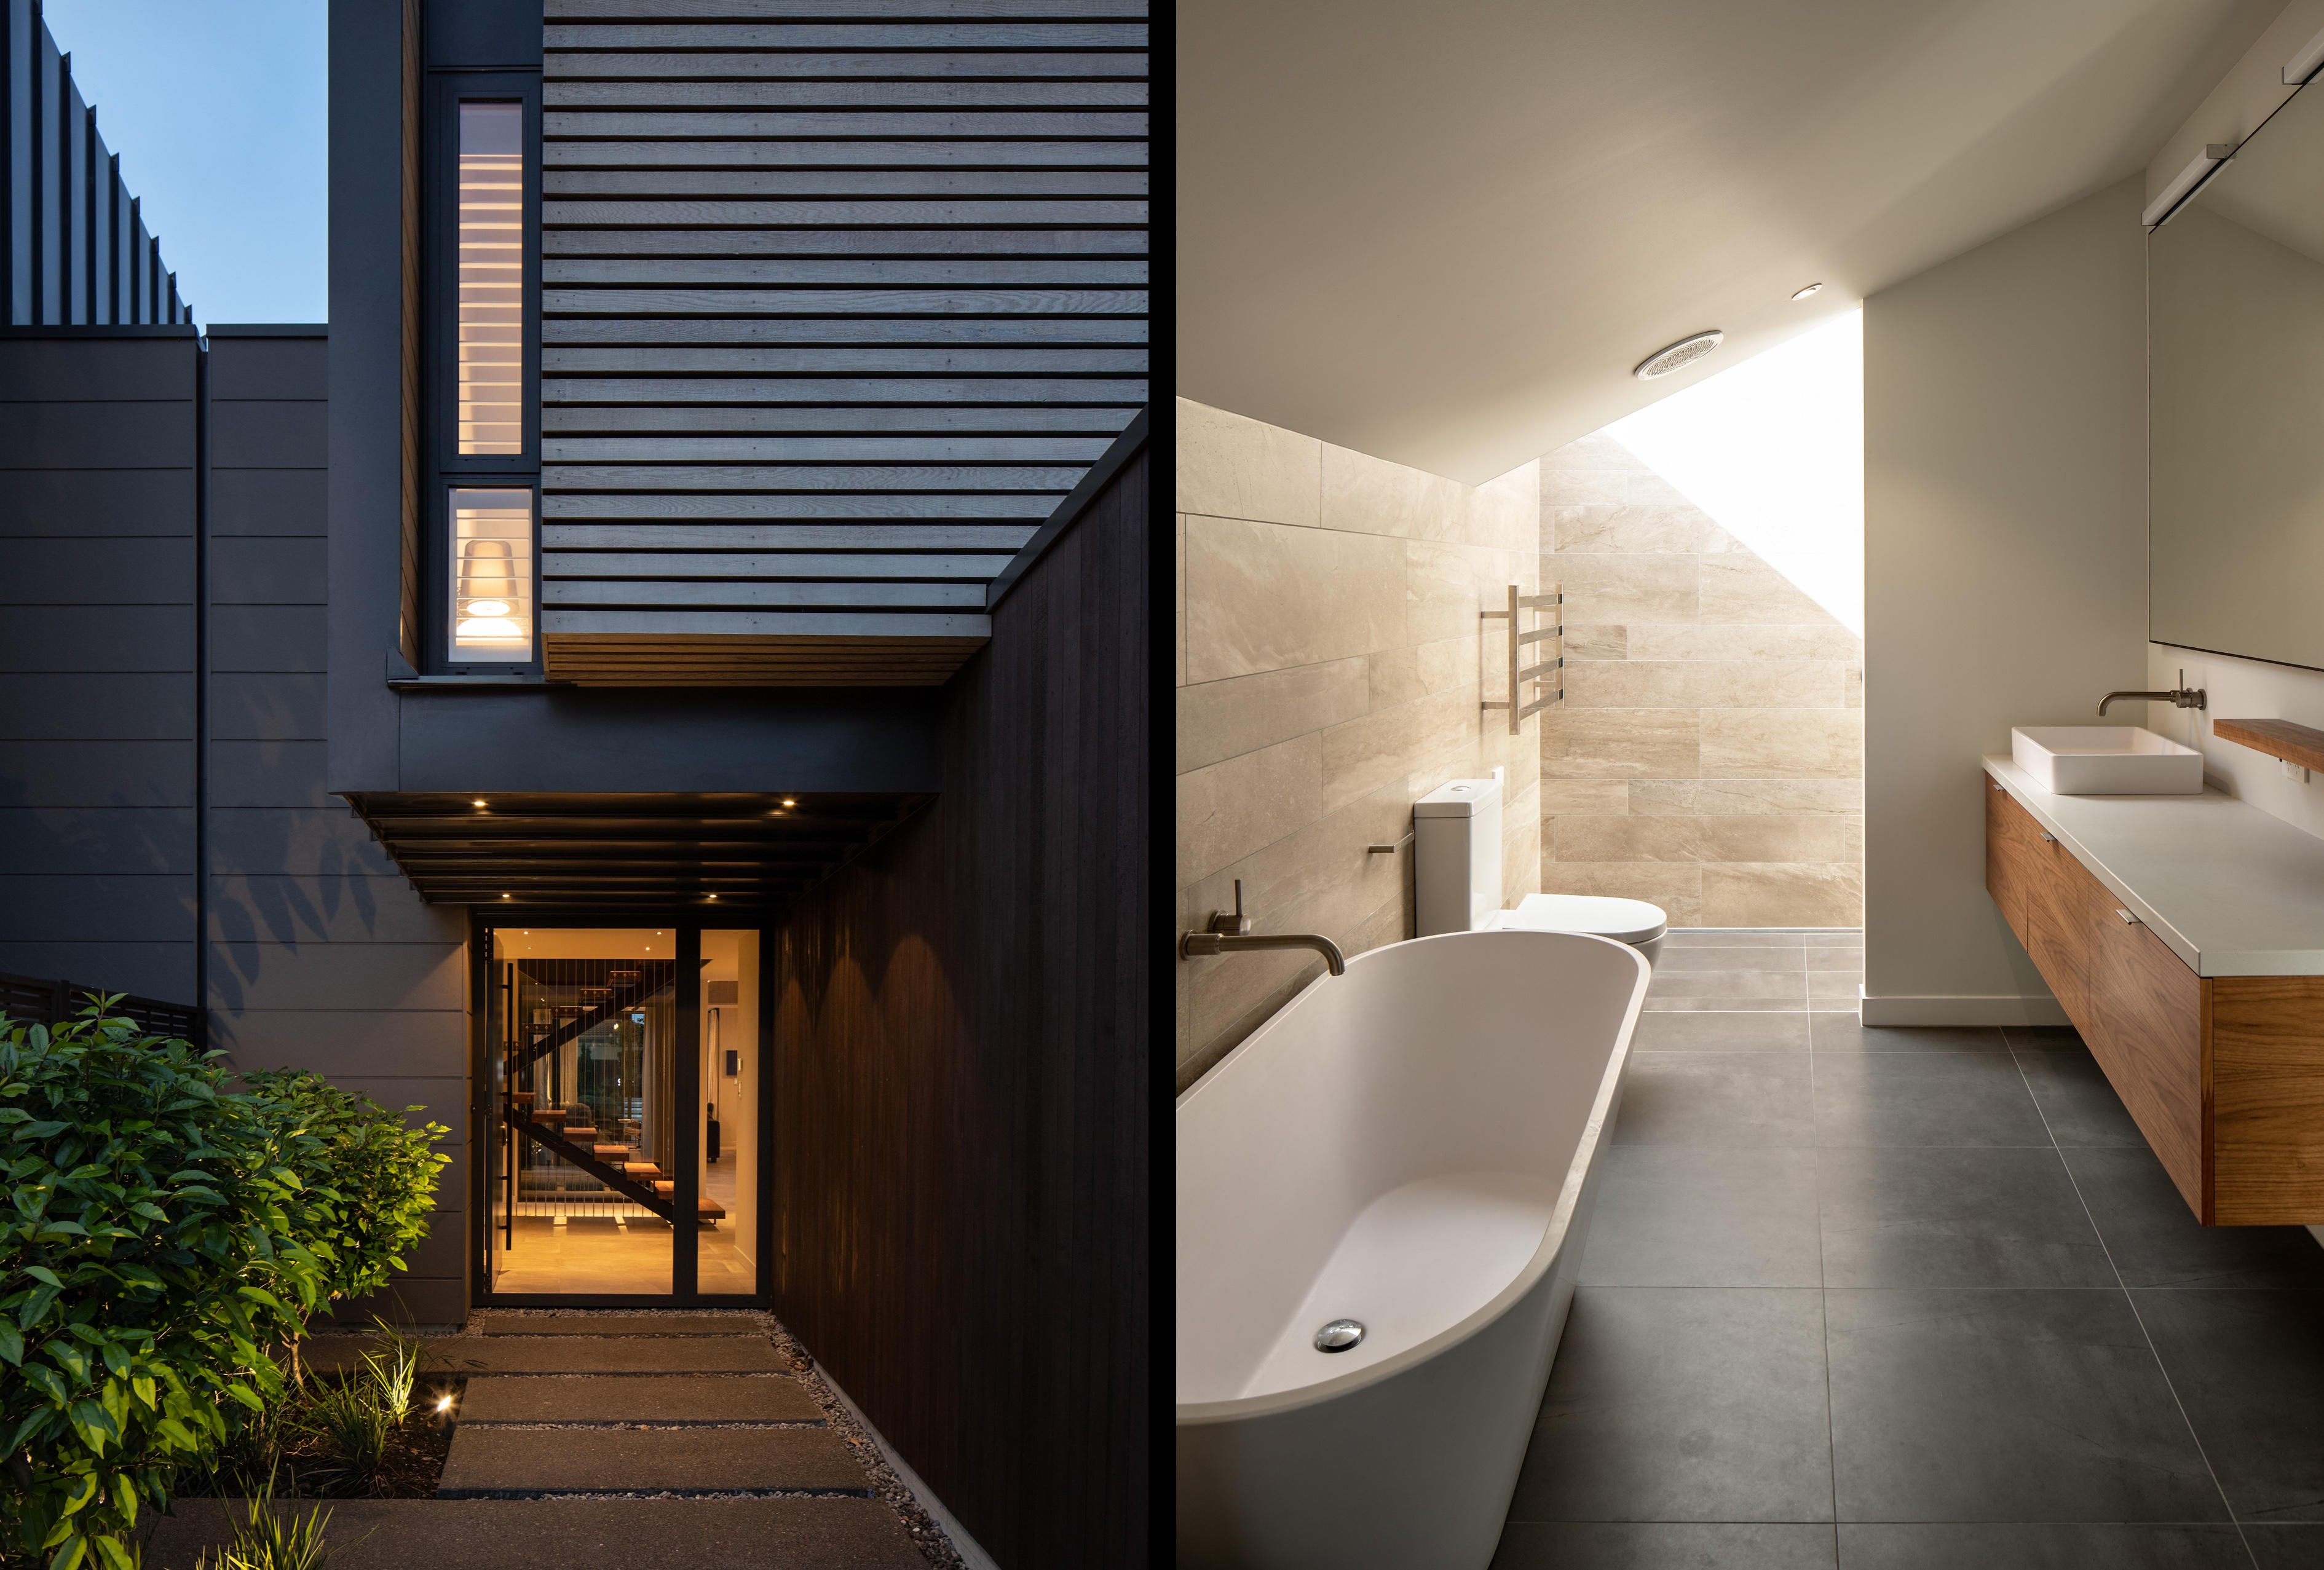 Split image with nighttime depiction of floating staircase through a glass entranceway on the right, and bathroom on the right showcasing tiling and modern fixtures